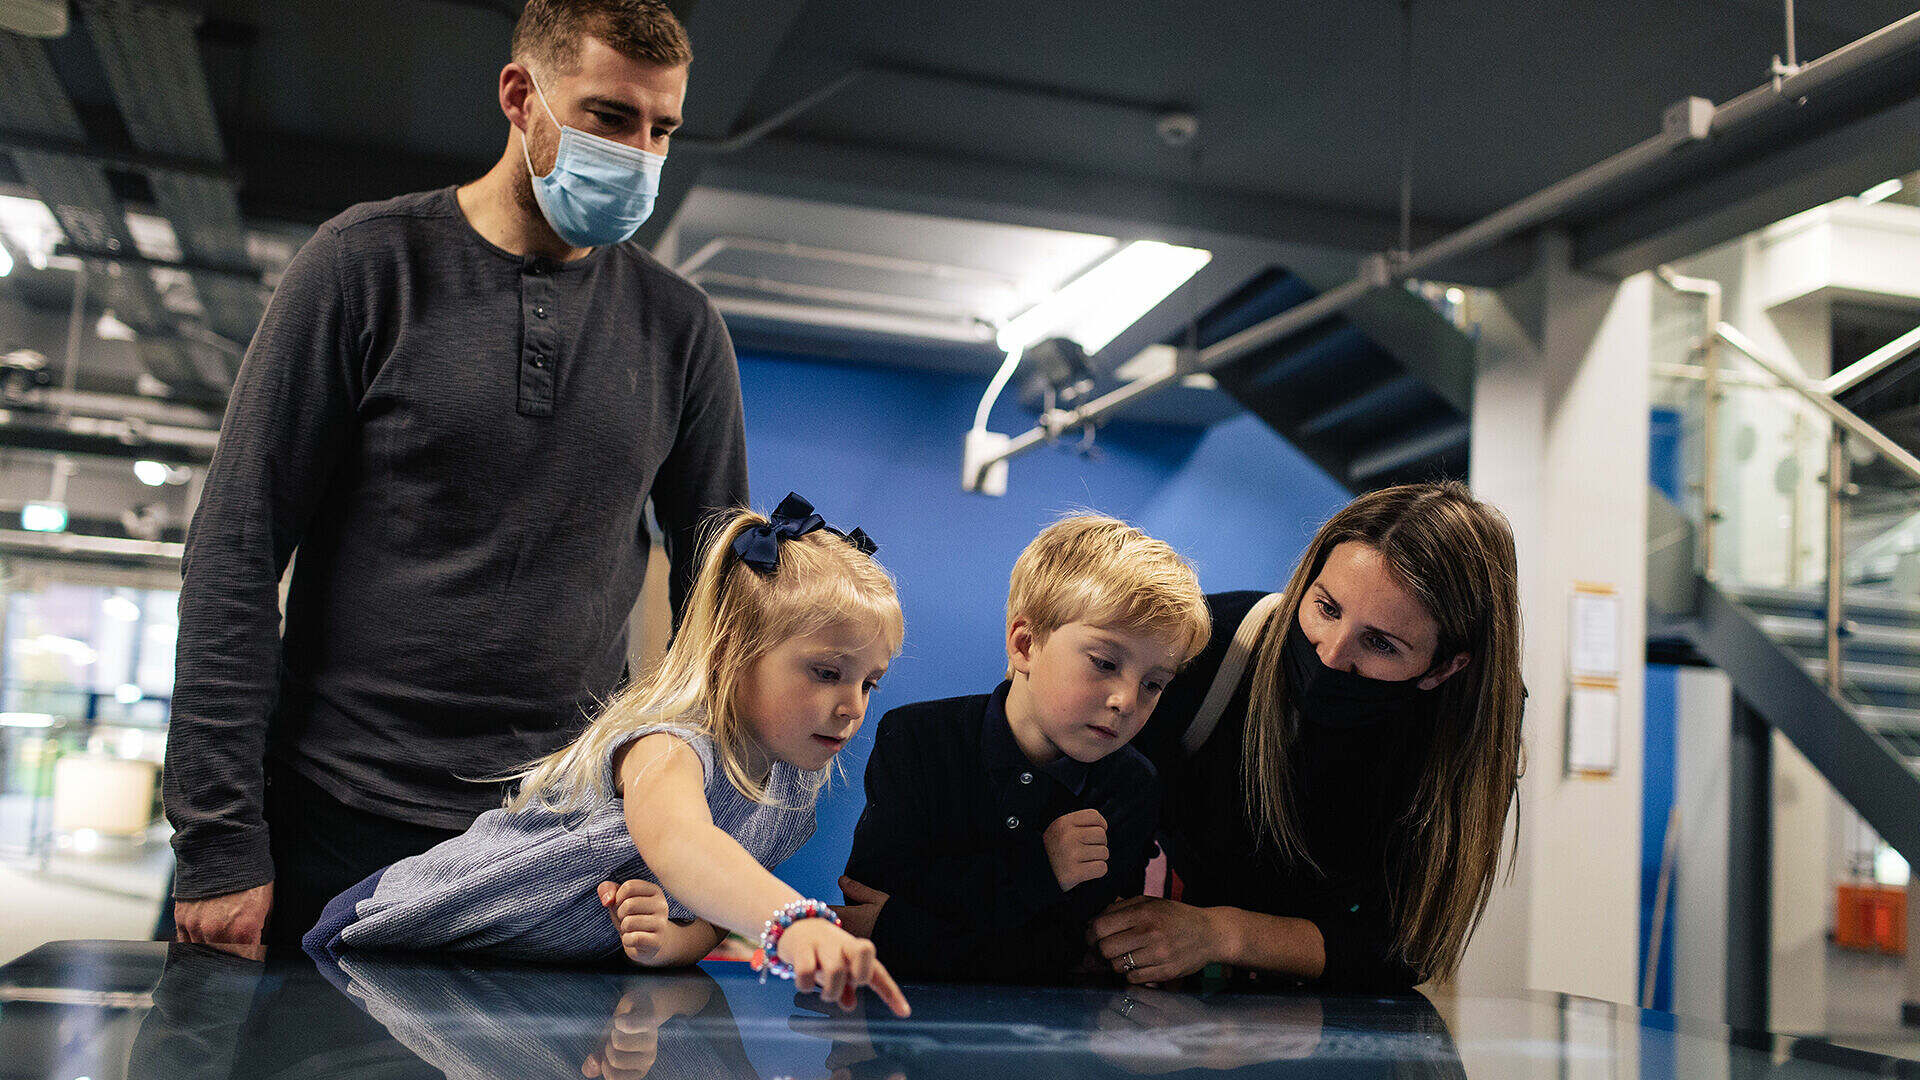 A family is learning anatomy using Inside Explorer installed on a multi touch table at The Aberdeen Science Centre.